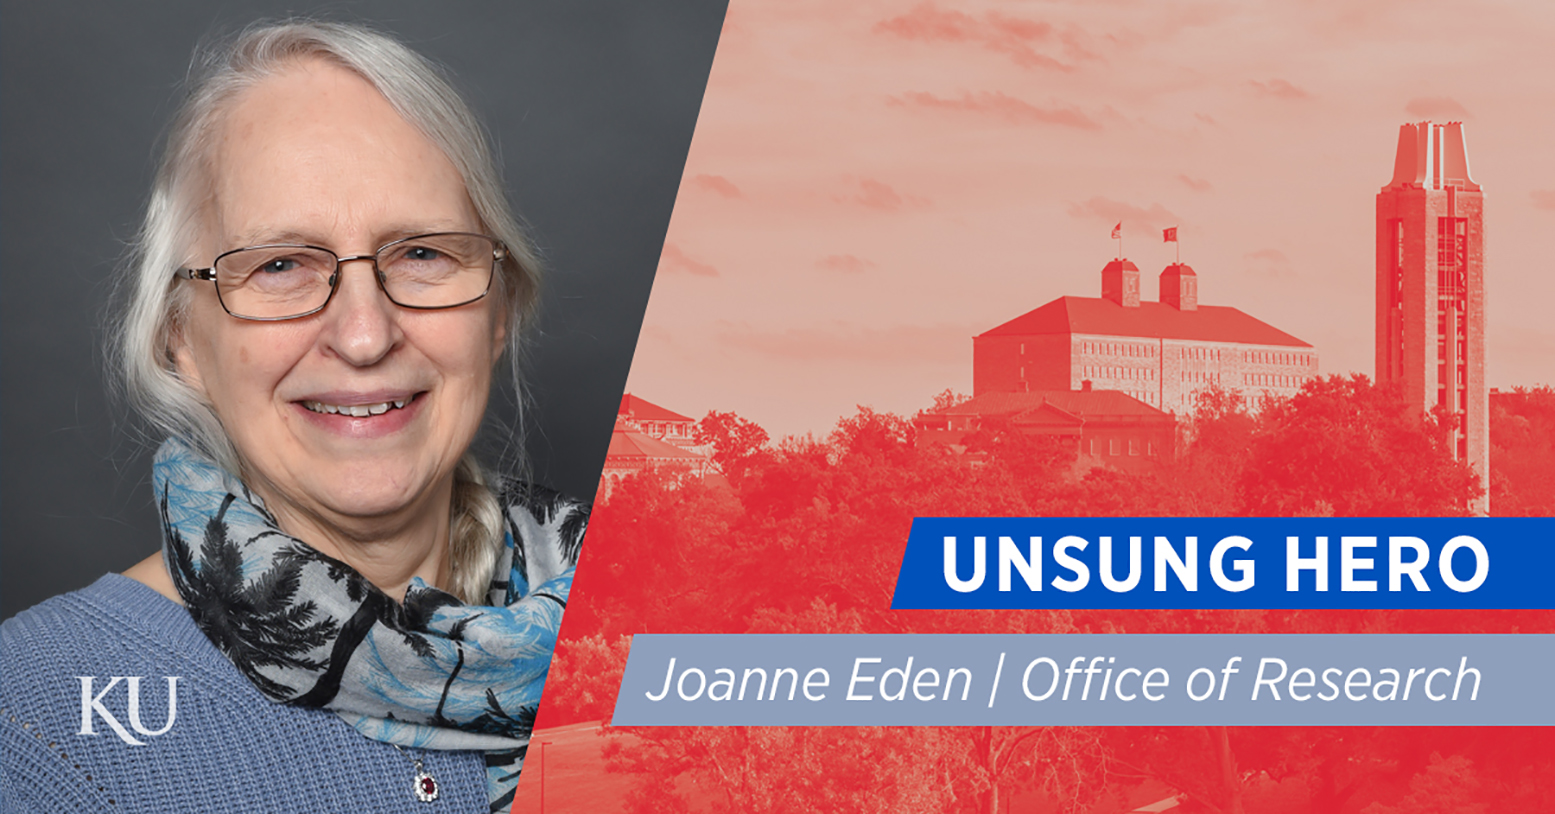 A graphic shows Joanne Eden on the left and text boxes on the right that read," Unsung Hero, Joanne Eden, Office of Research"